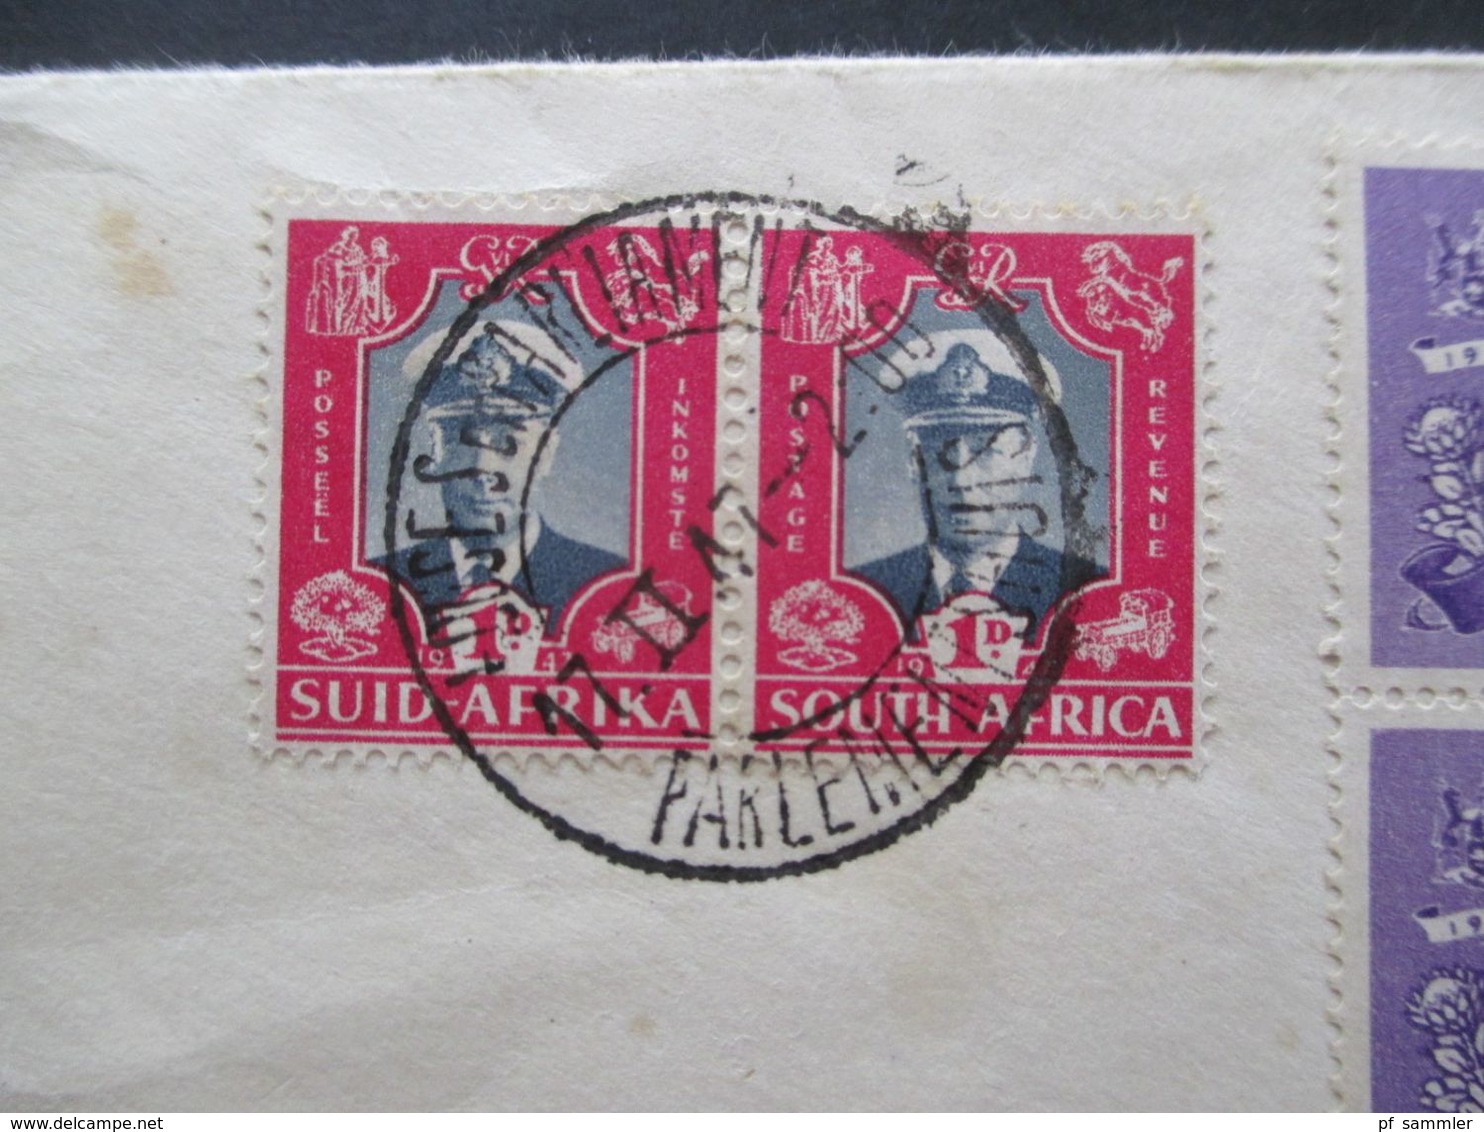 Südafrika 1947 Beleg Mit Wappen House Of Assembly Cape Town 3 Paare South Africa / Suid Africa Stempel Parliament - Lettres & Documents